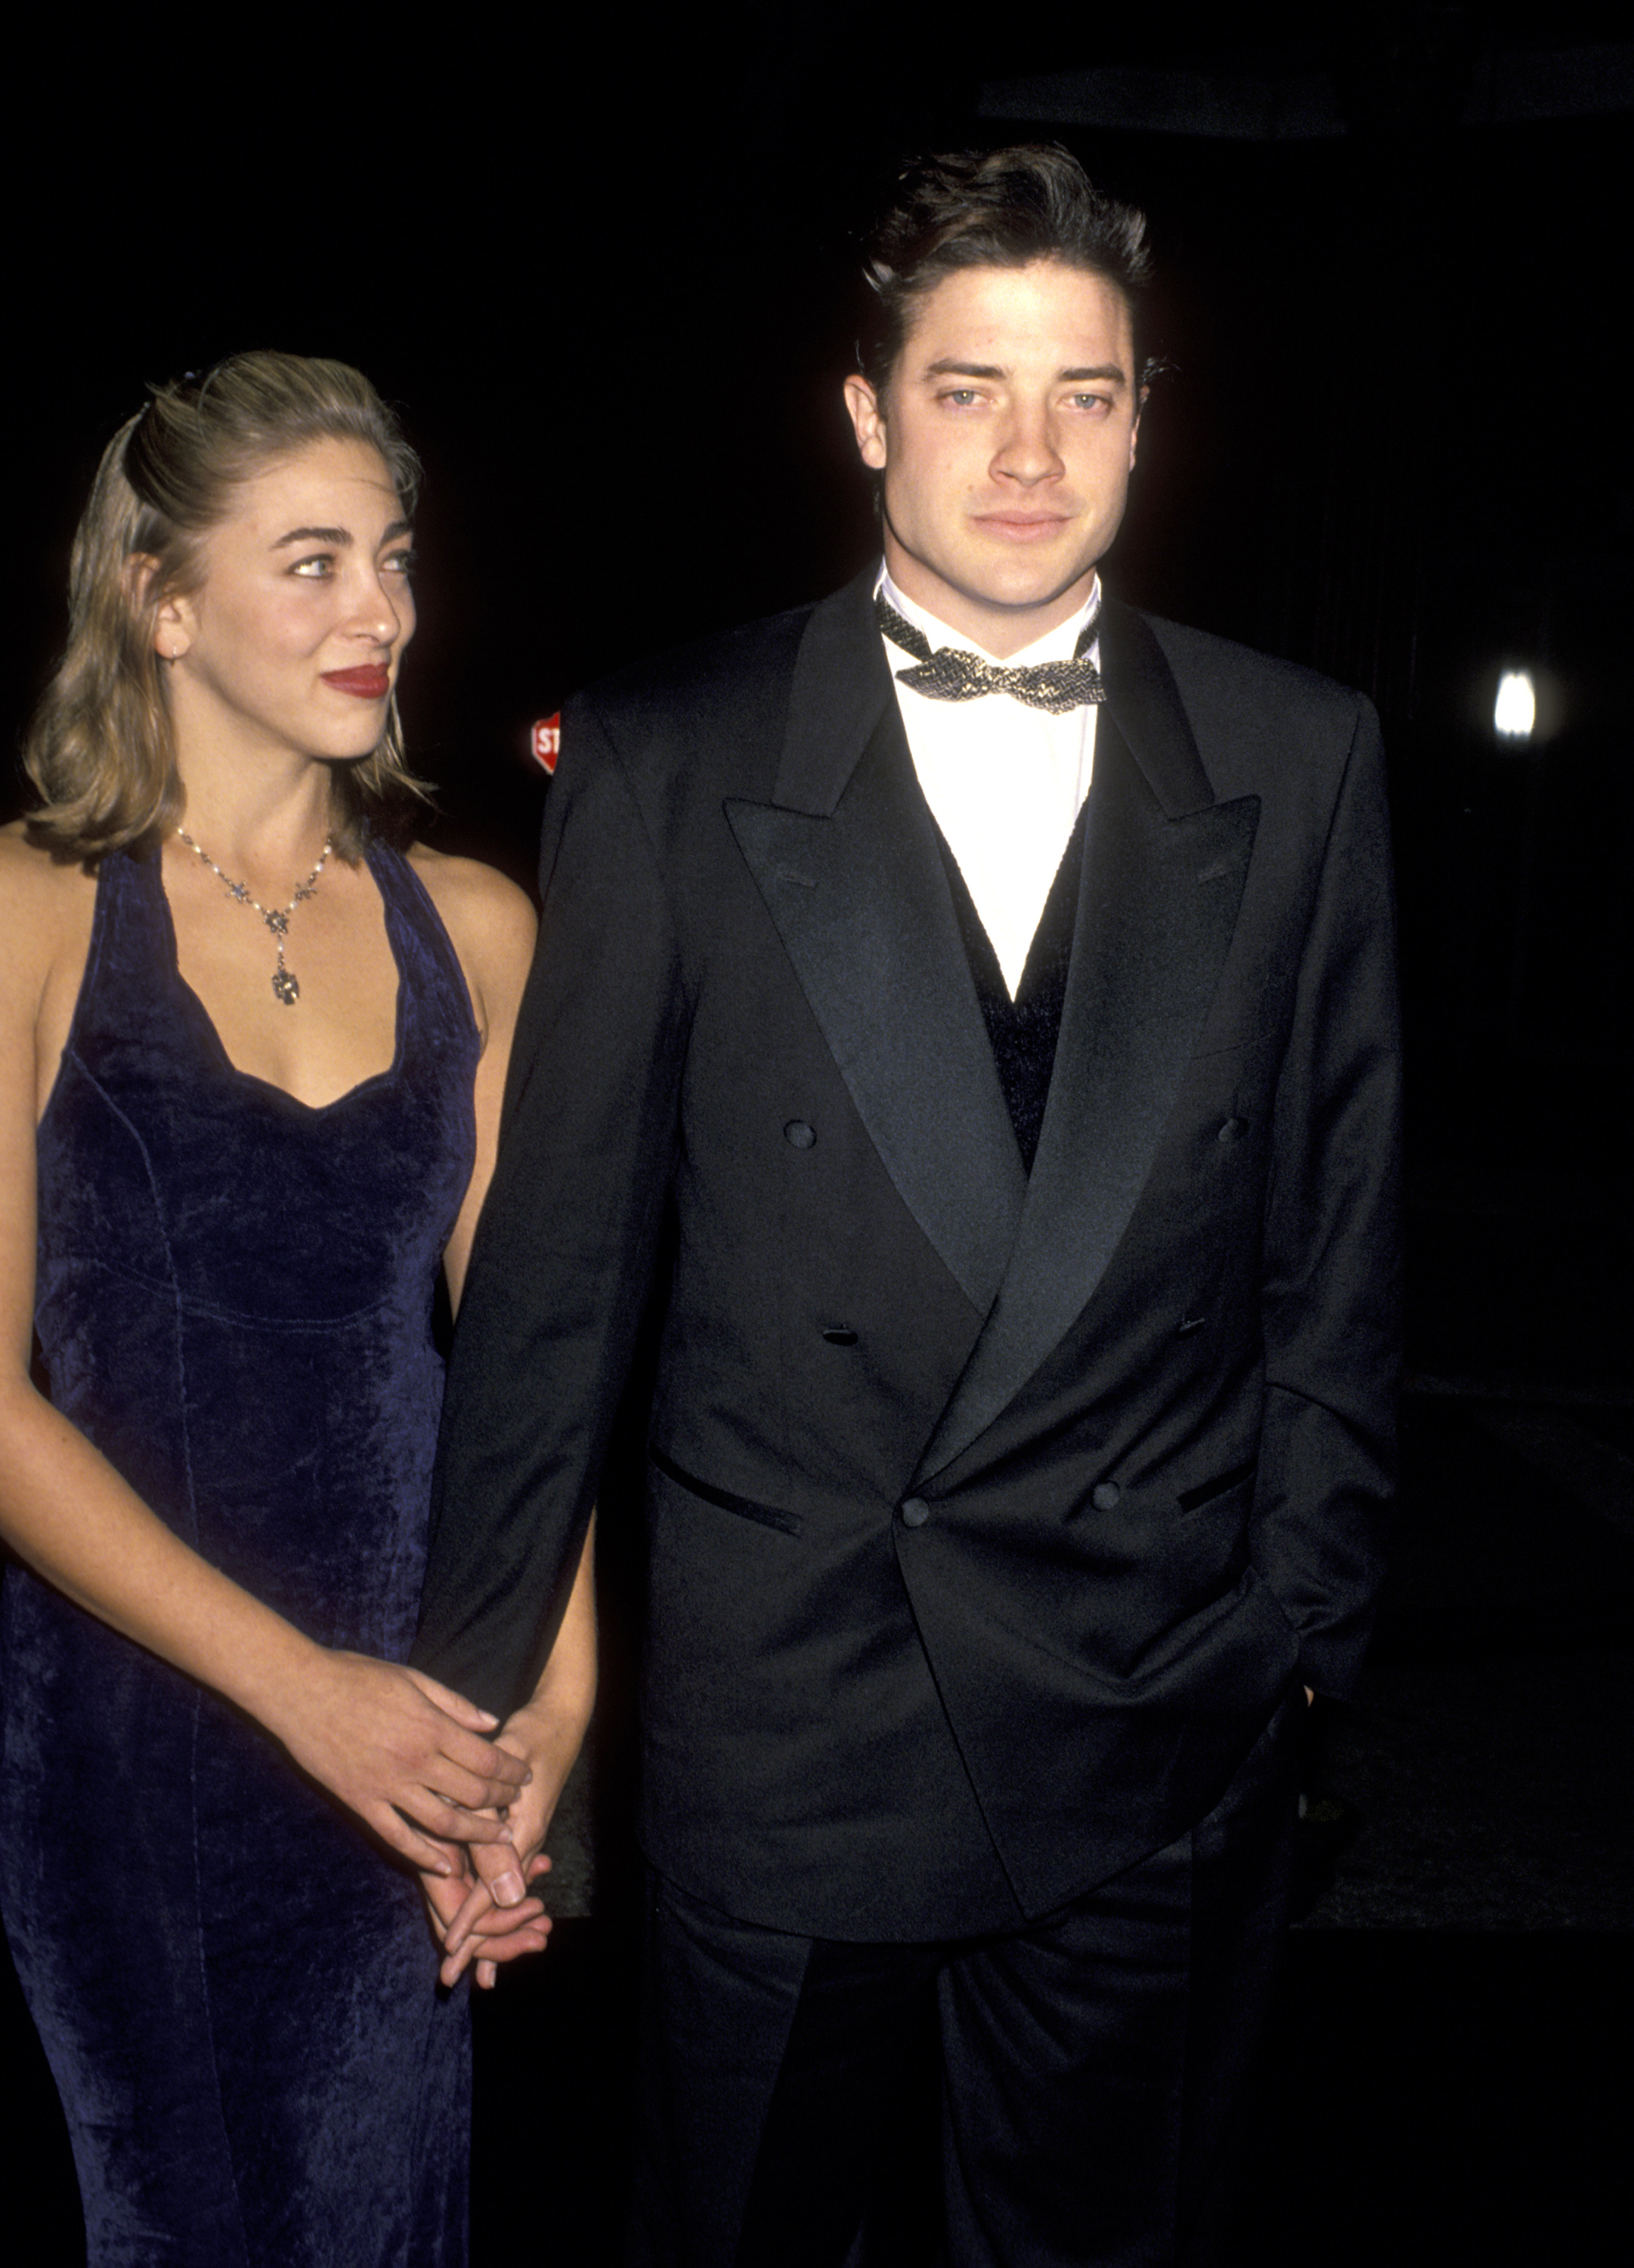 Brendan Fraser and Afton Smith at the 5th Annual Fire and Ice Ball on December 7, 1994, in Century City, California. | Source: Getty Images